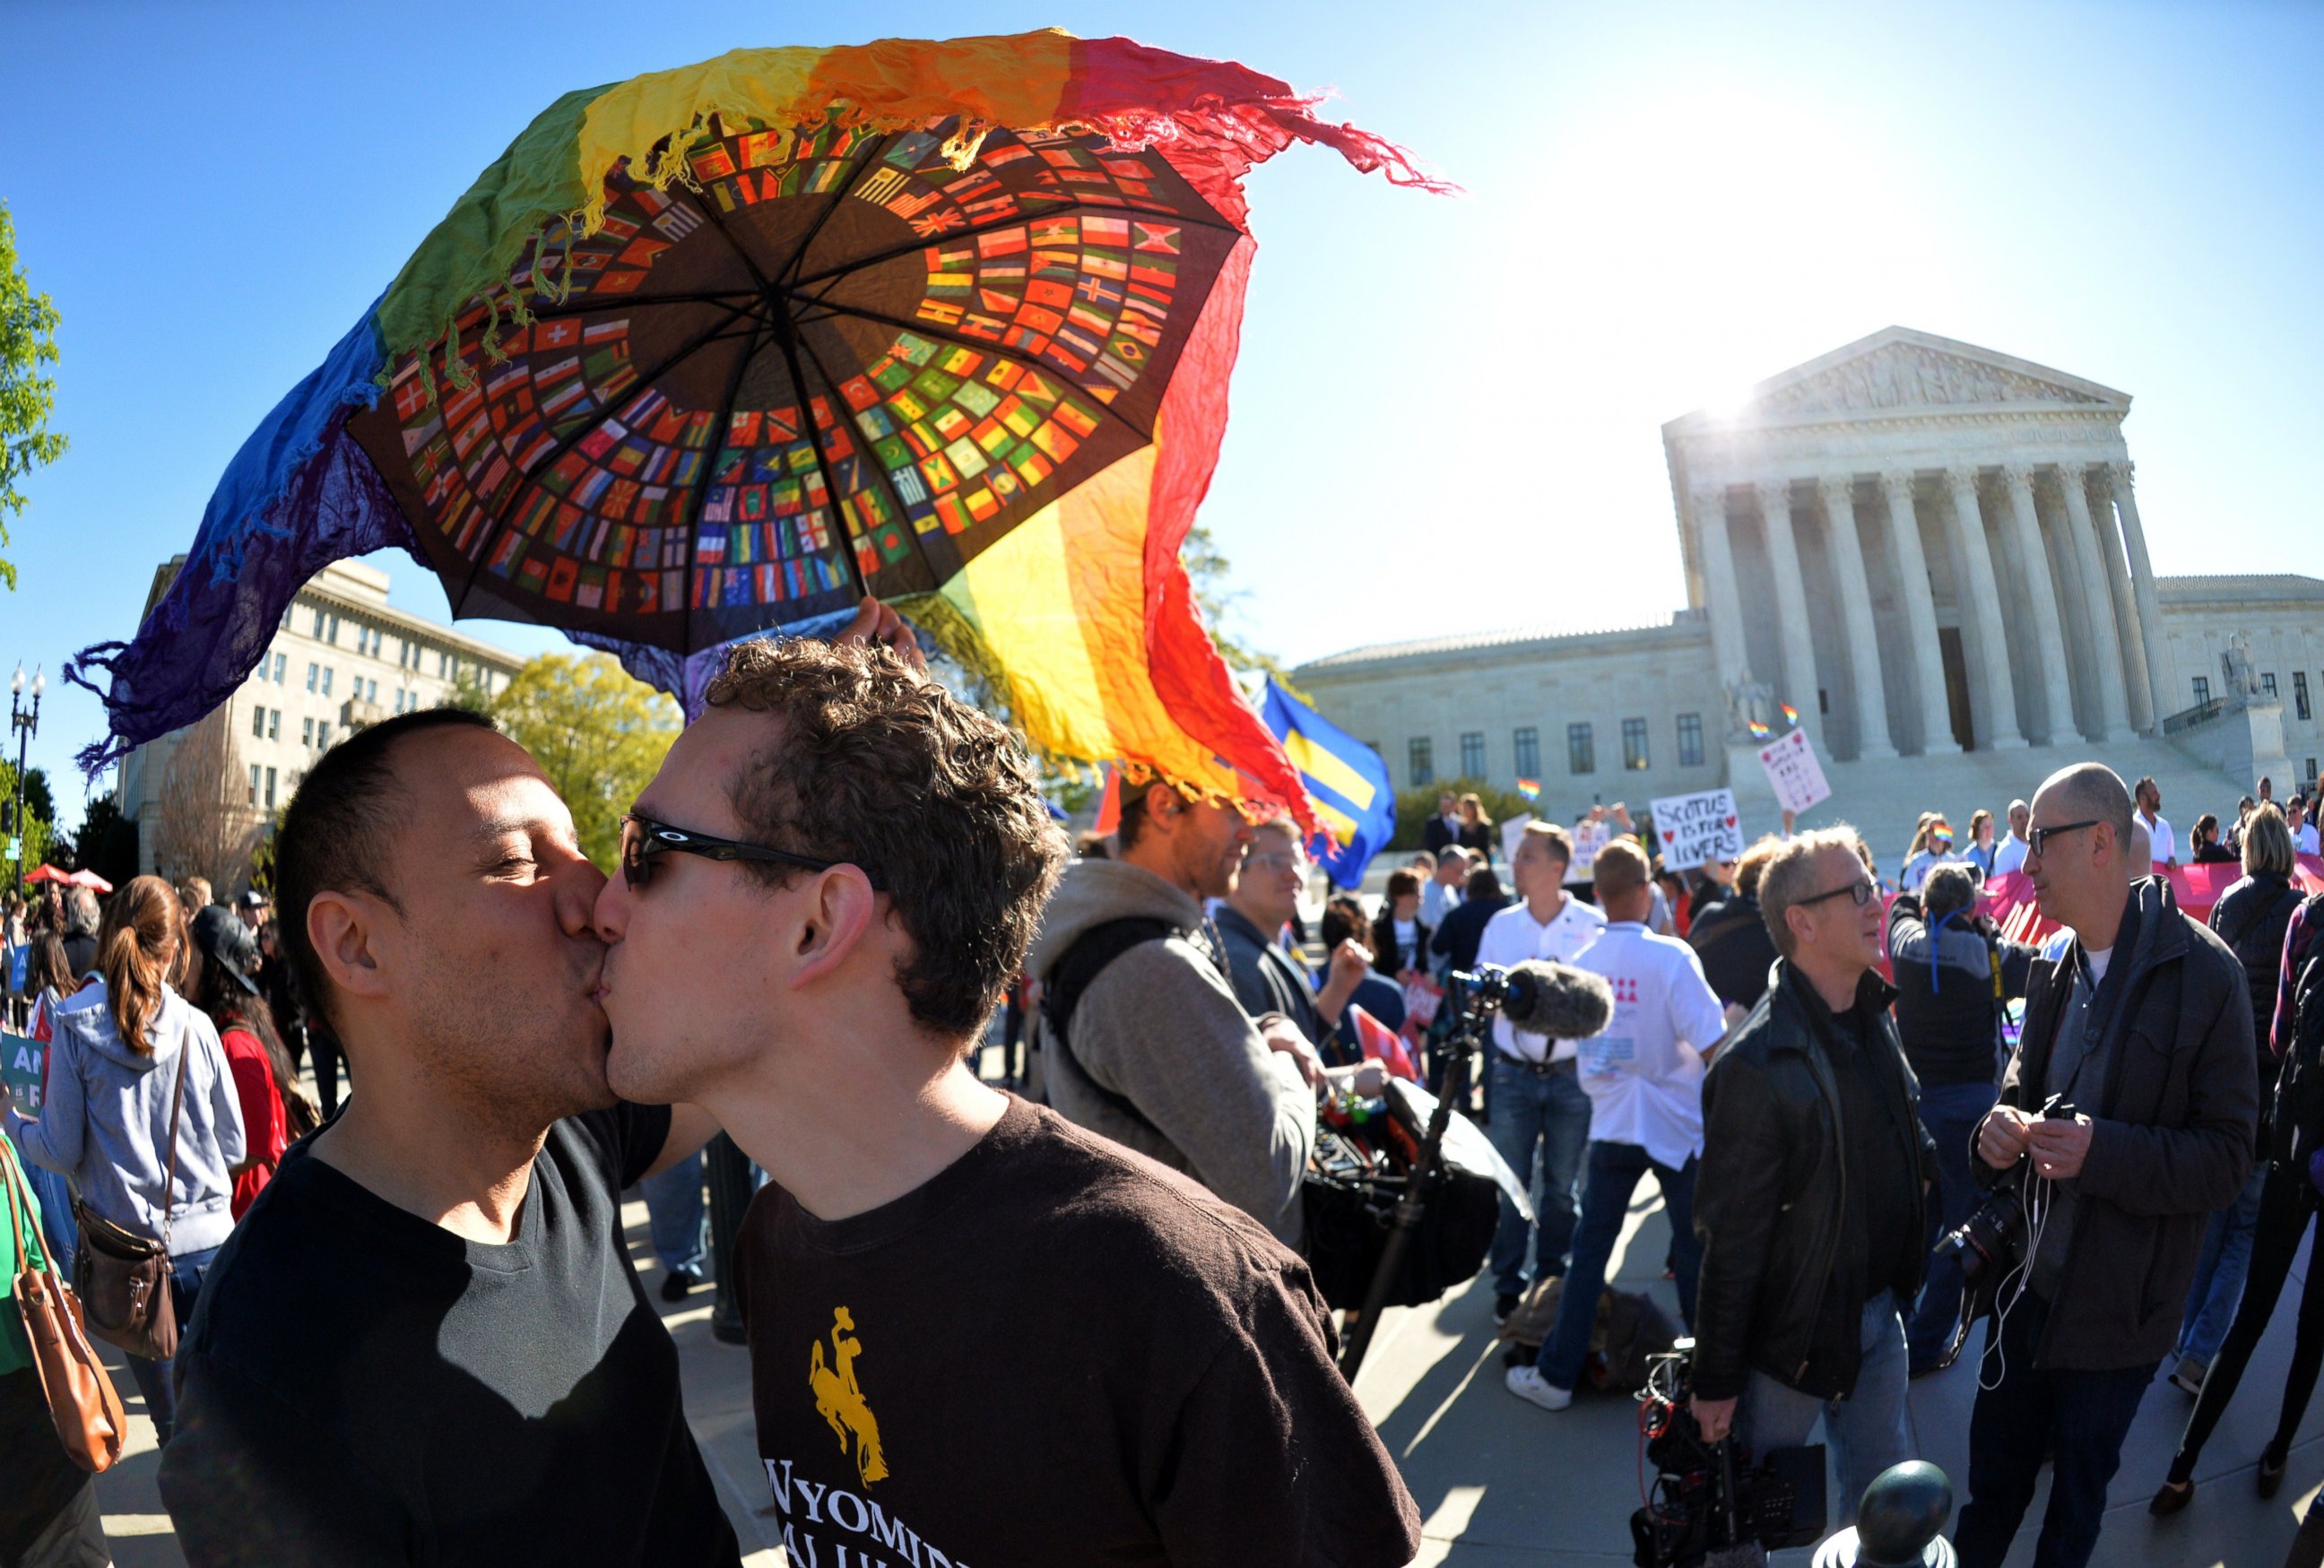 PHOTO: A gay couple kisses outside the US Supreme Court on April 28, 2015 as the court hears arguments on whether gay couples have a constitutional right to wed - a potentially historic decision that could see same-sex marriage recognized nationwide.